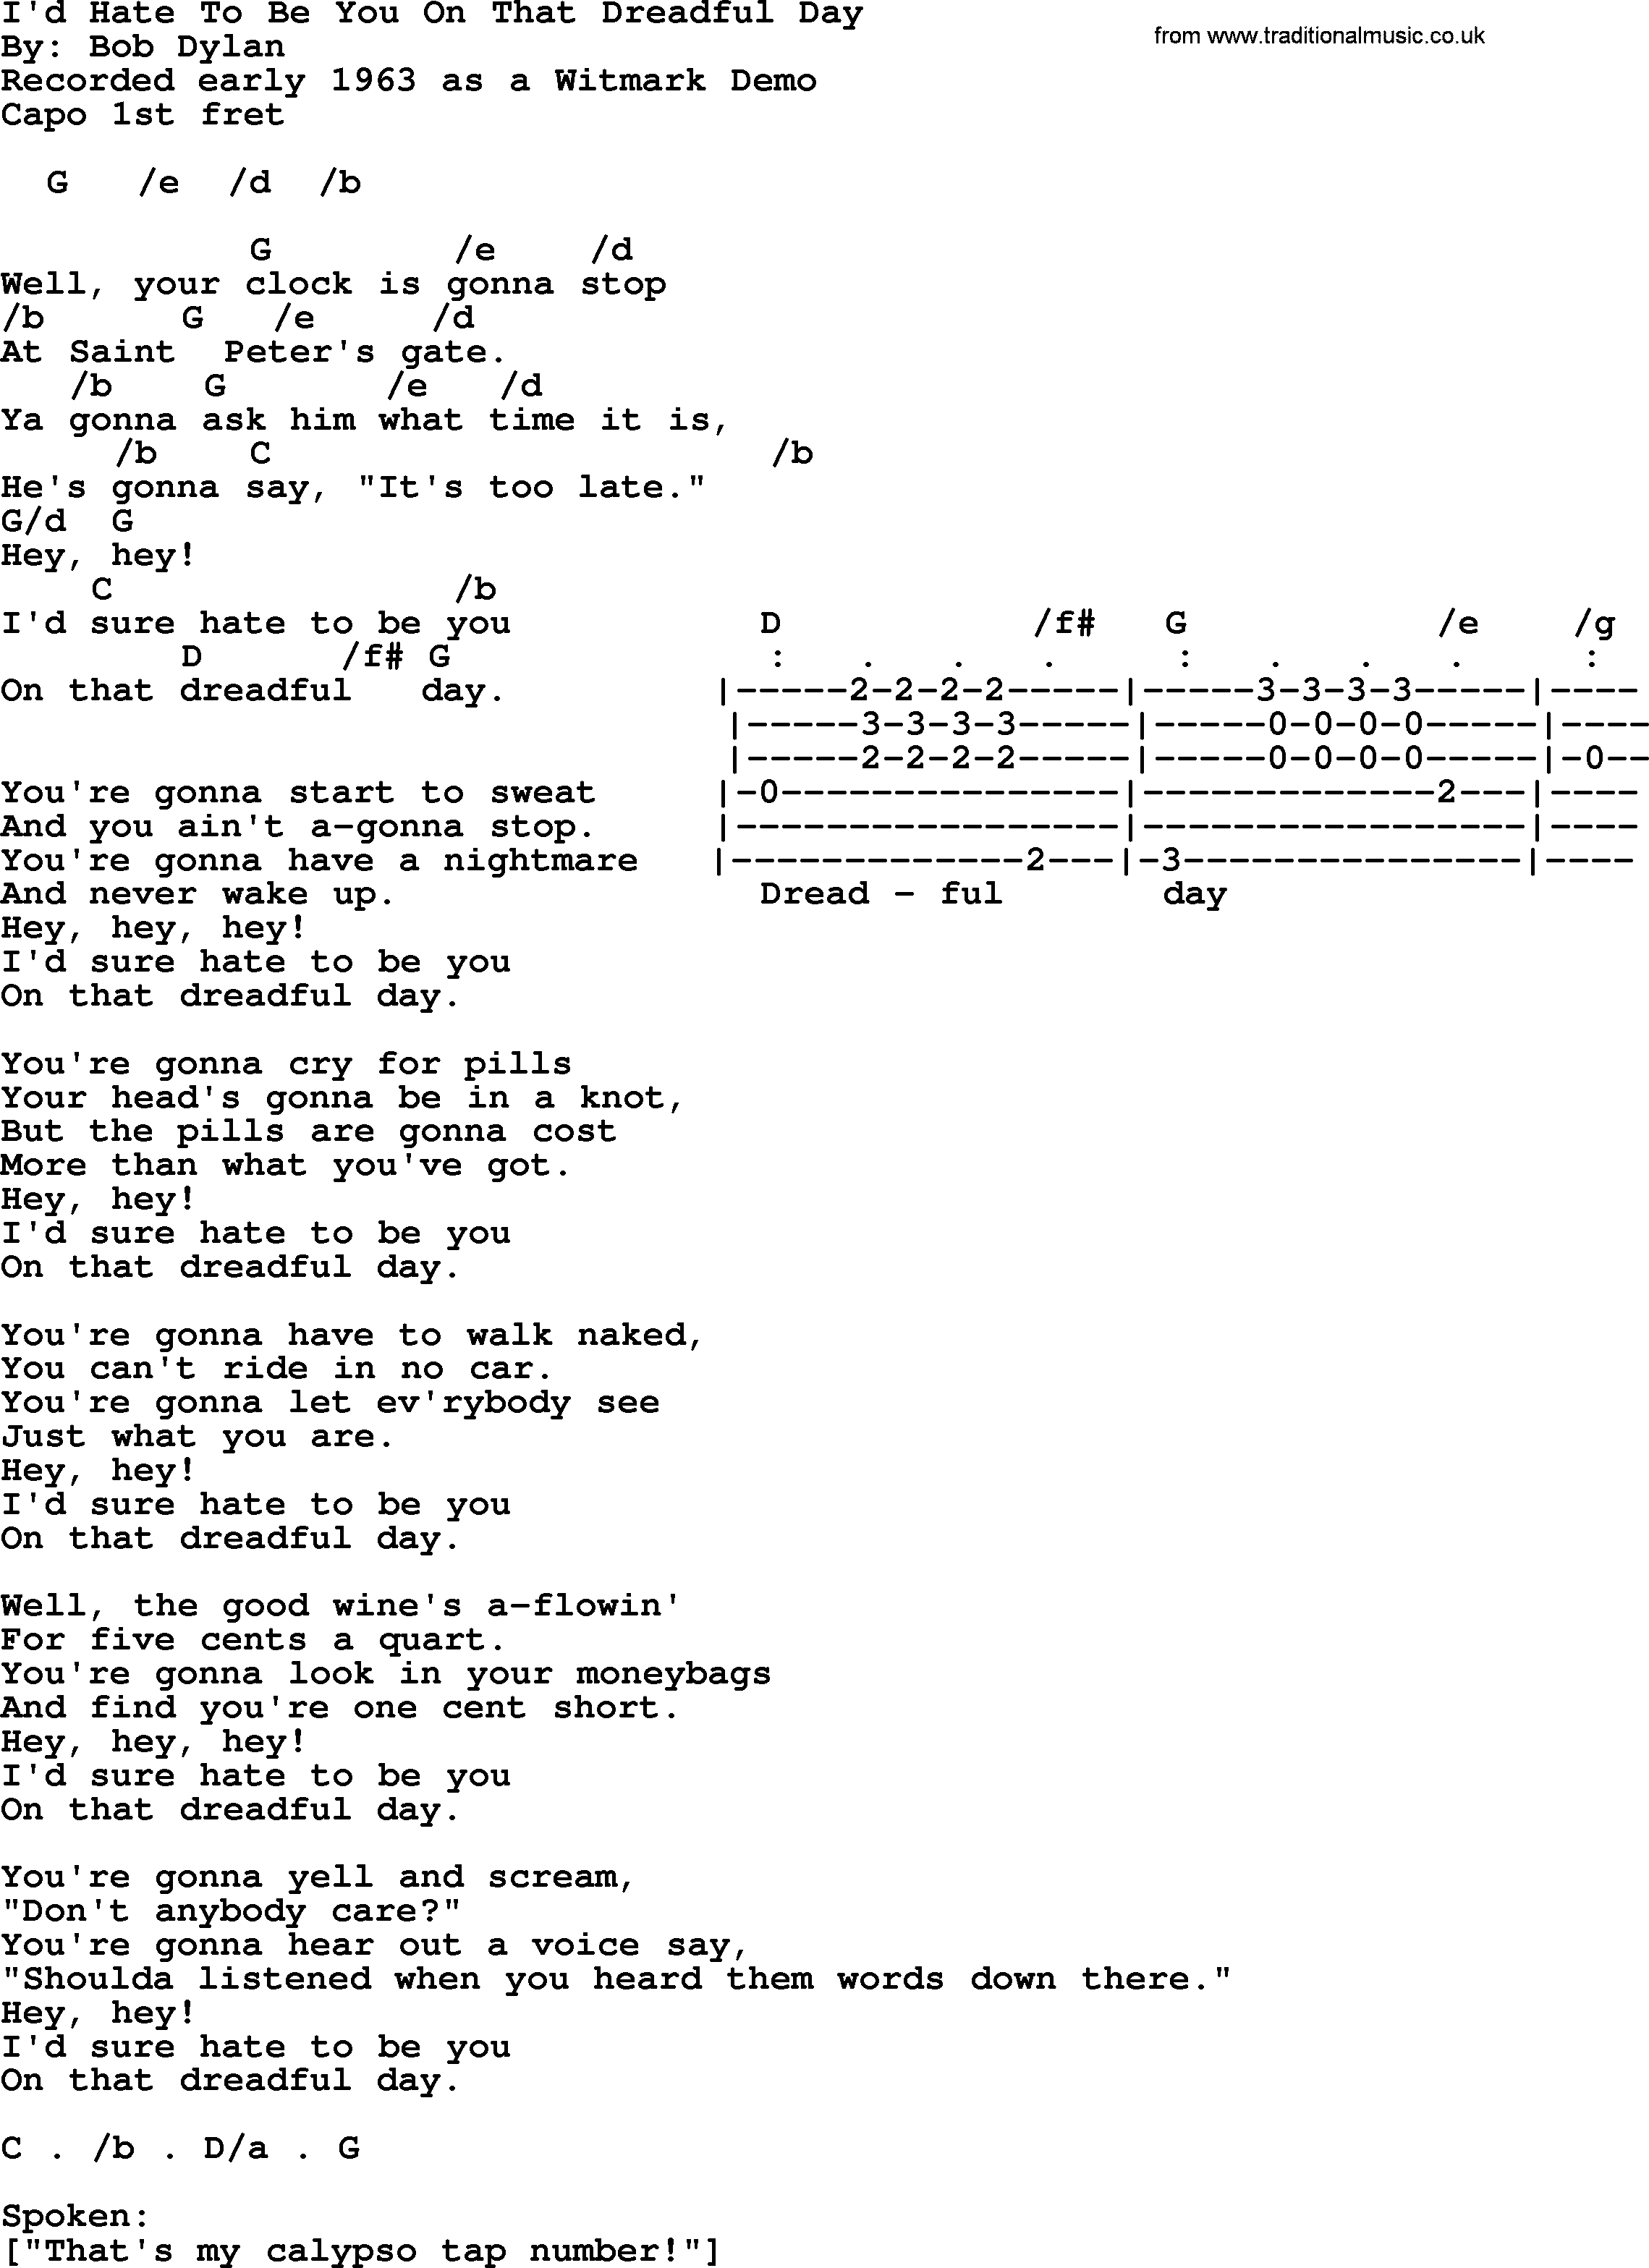 Bob Dylan song, lyrics with chords - I'd Hate To Be You On That Dreadful Day